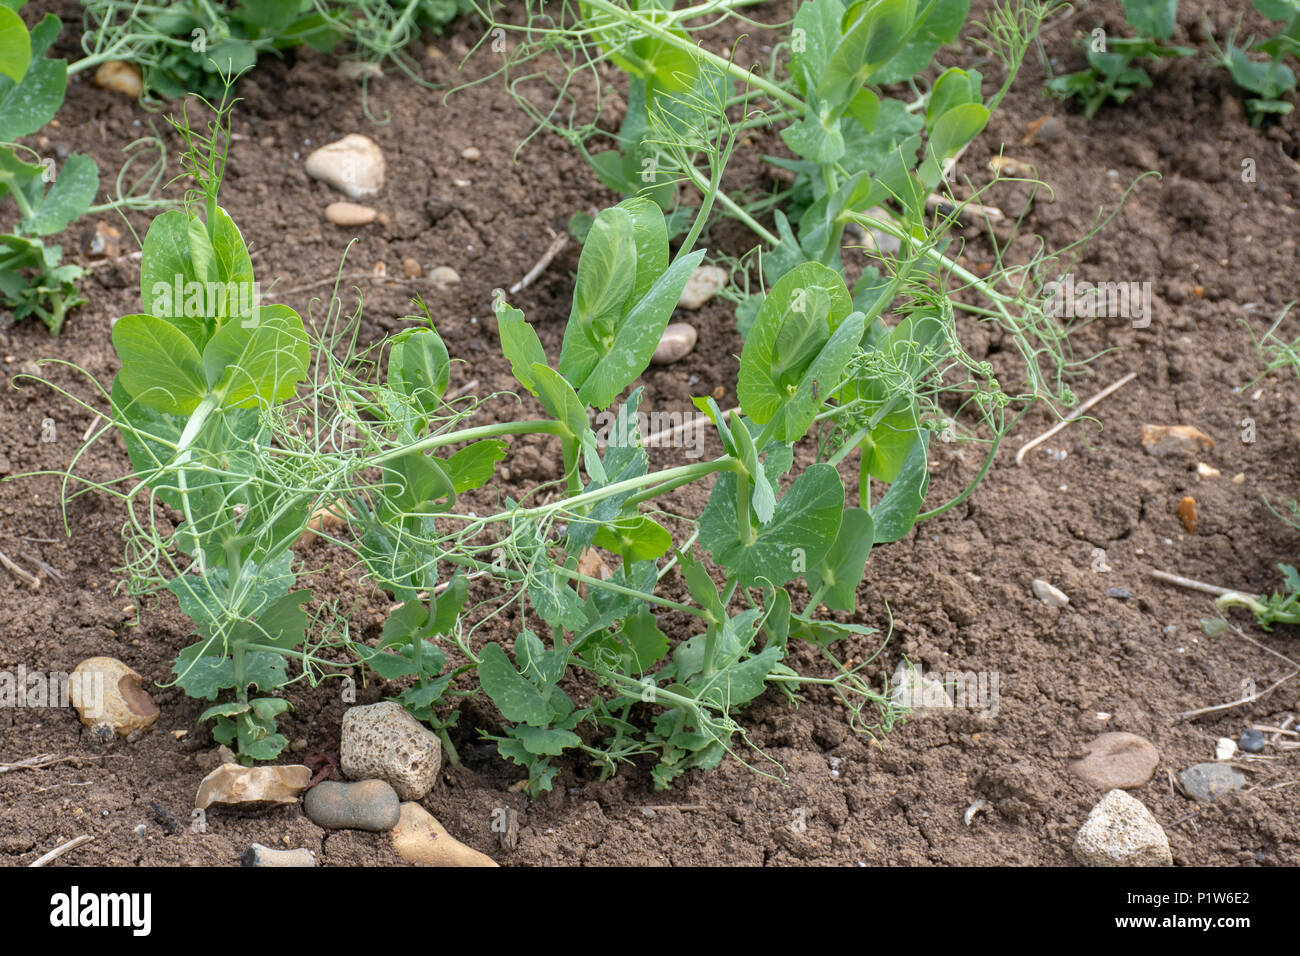 Small Peas growing in field Stock Photo